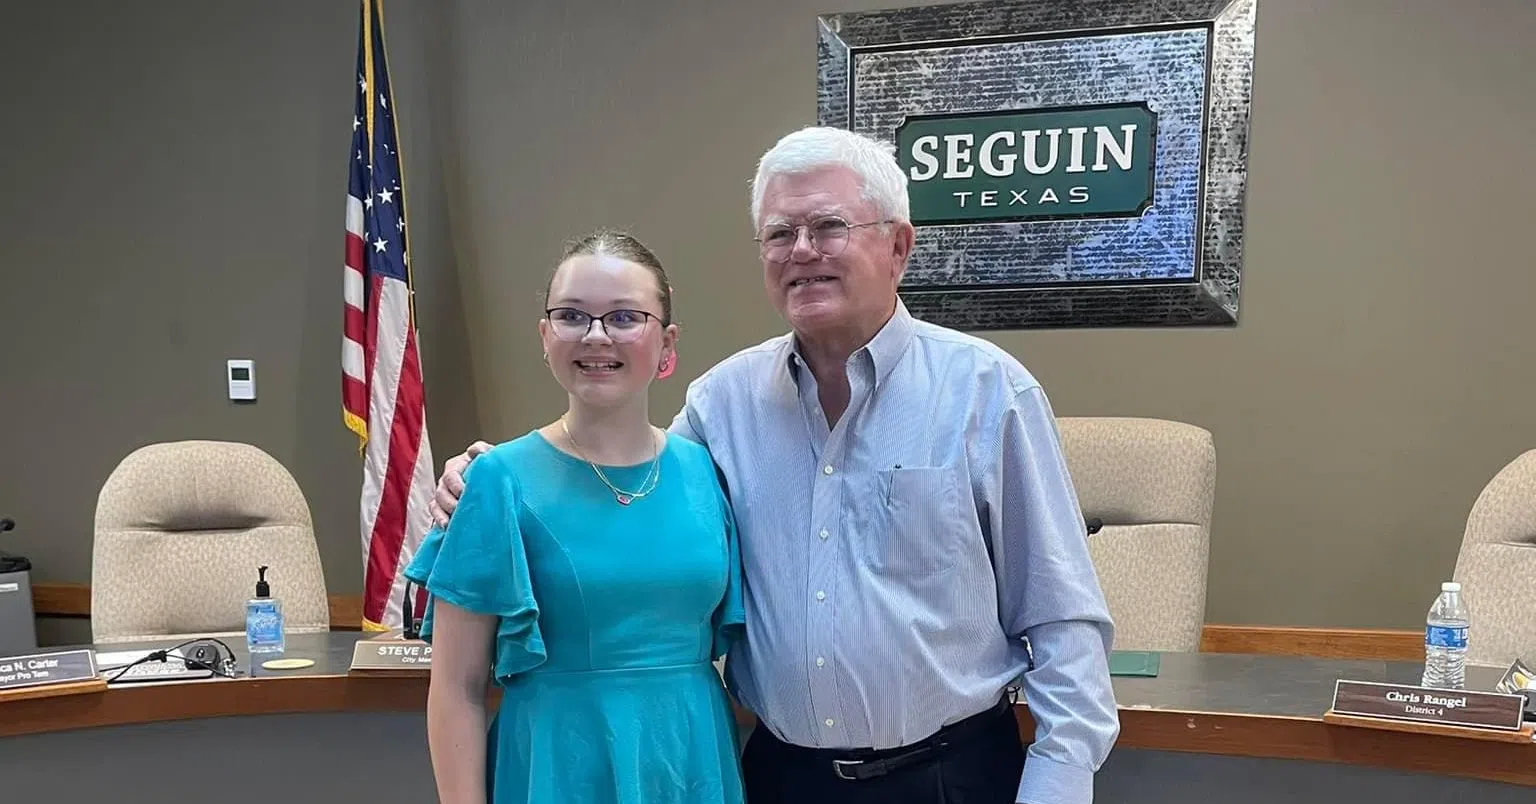 City honors national baking champion with ties to Seguin